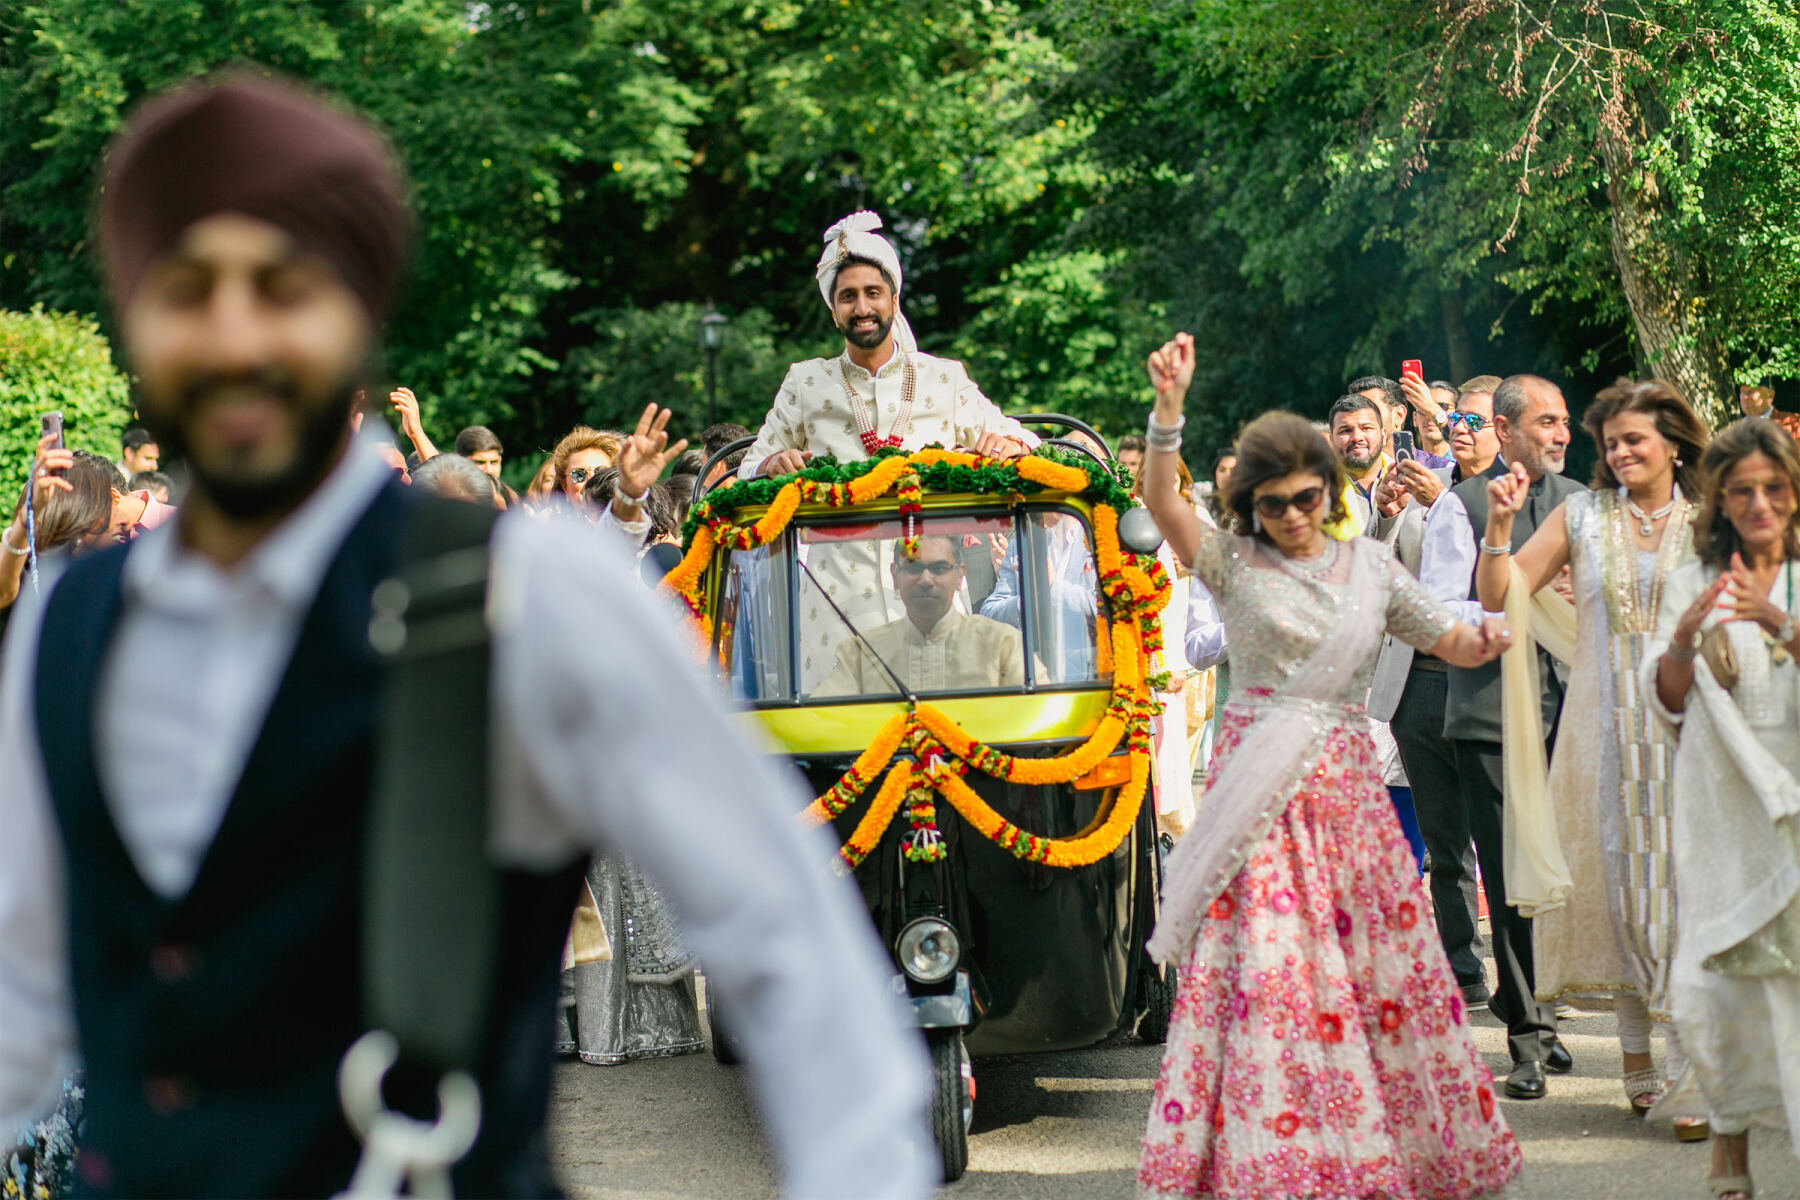 The groom arrives in a tuktuk during his baraat, starting the colorful countryside wedding ceremony.